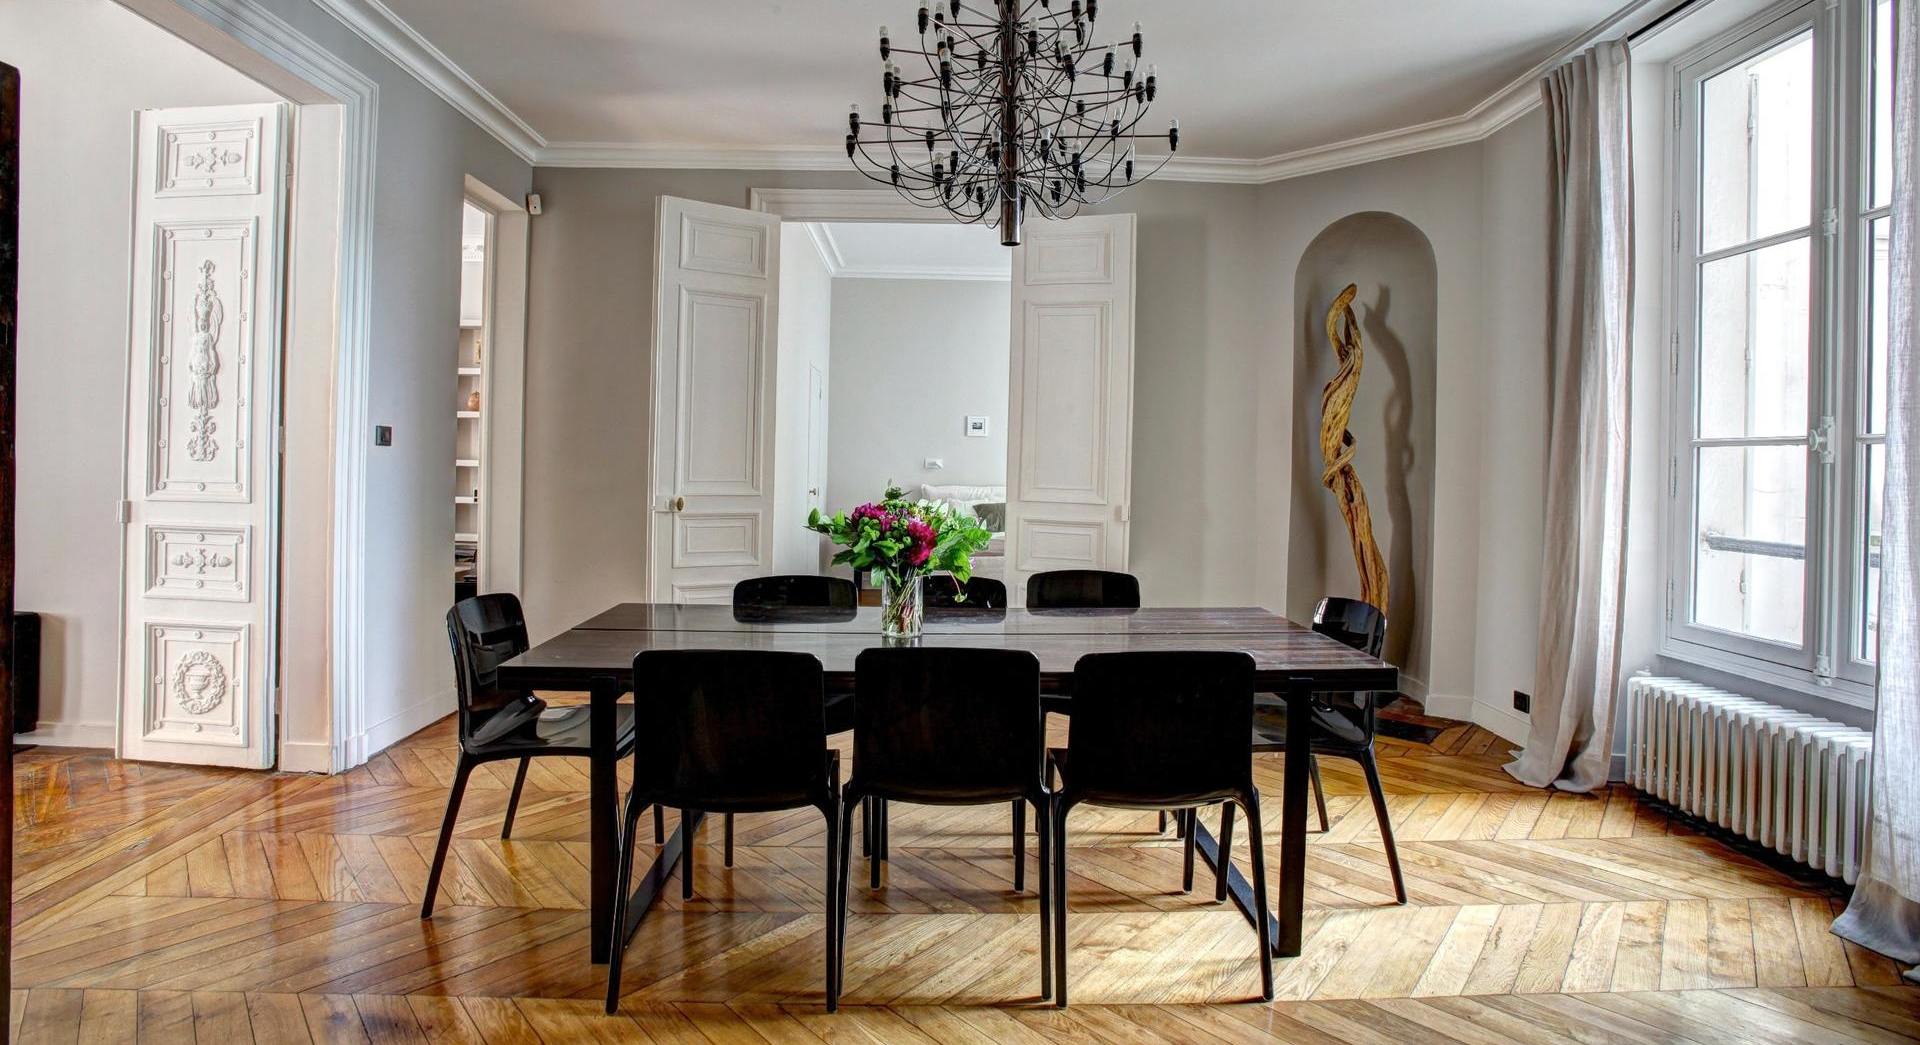 Luxury home dining room with feature light and parquet flooring